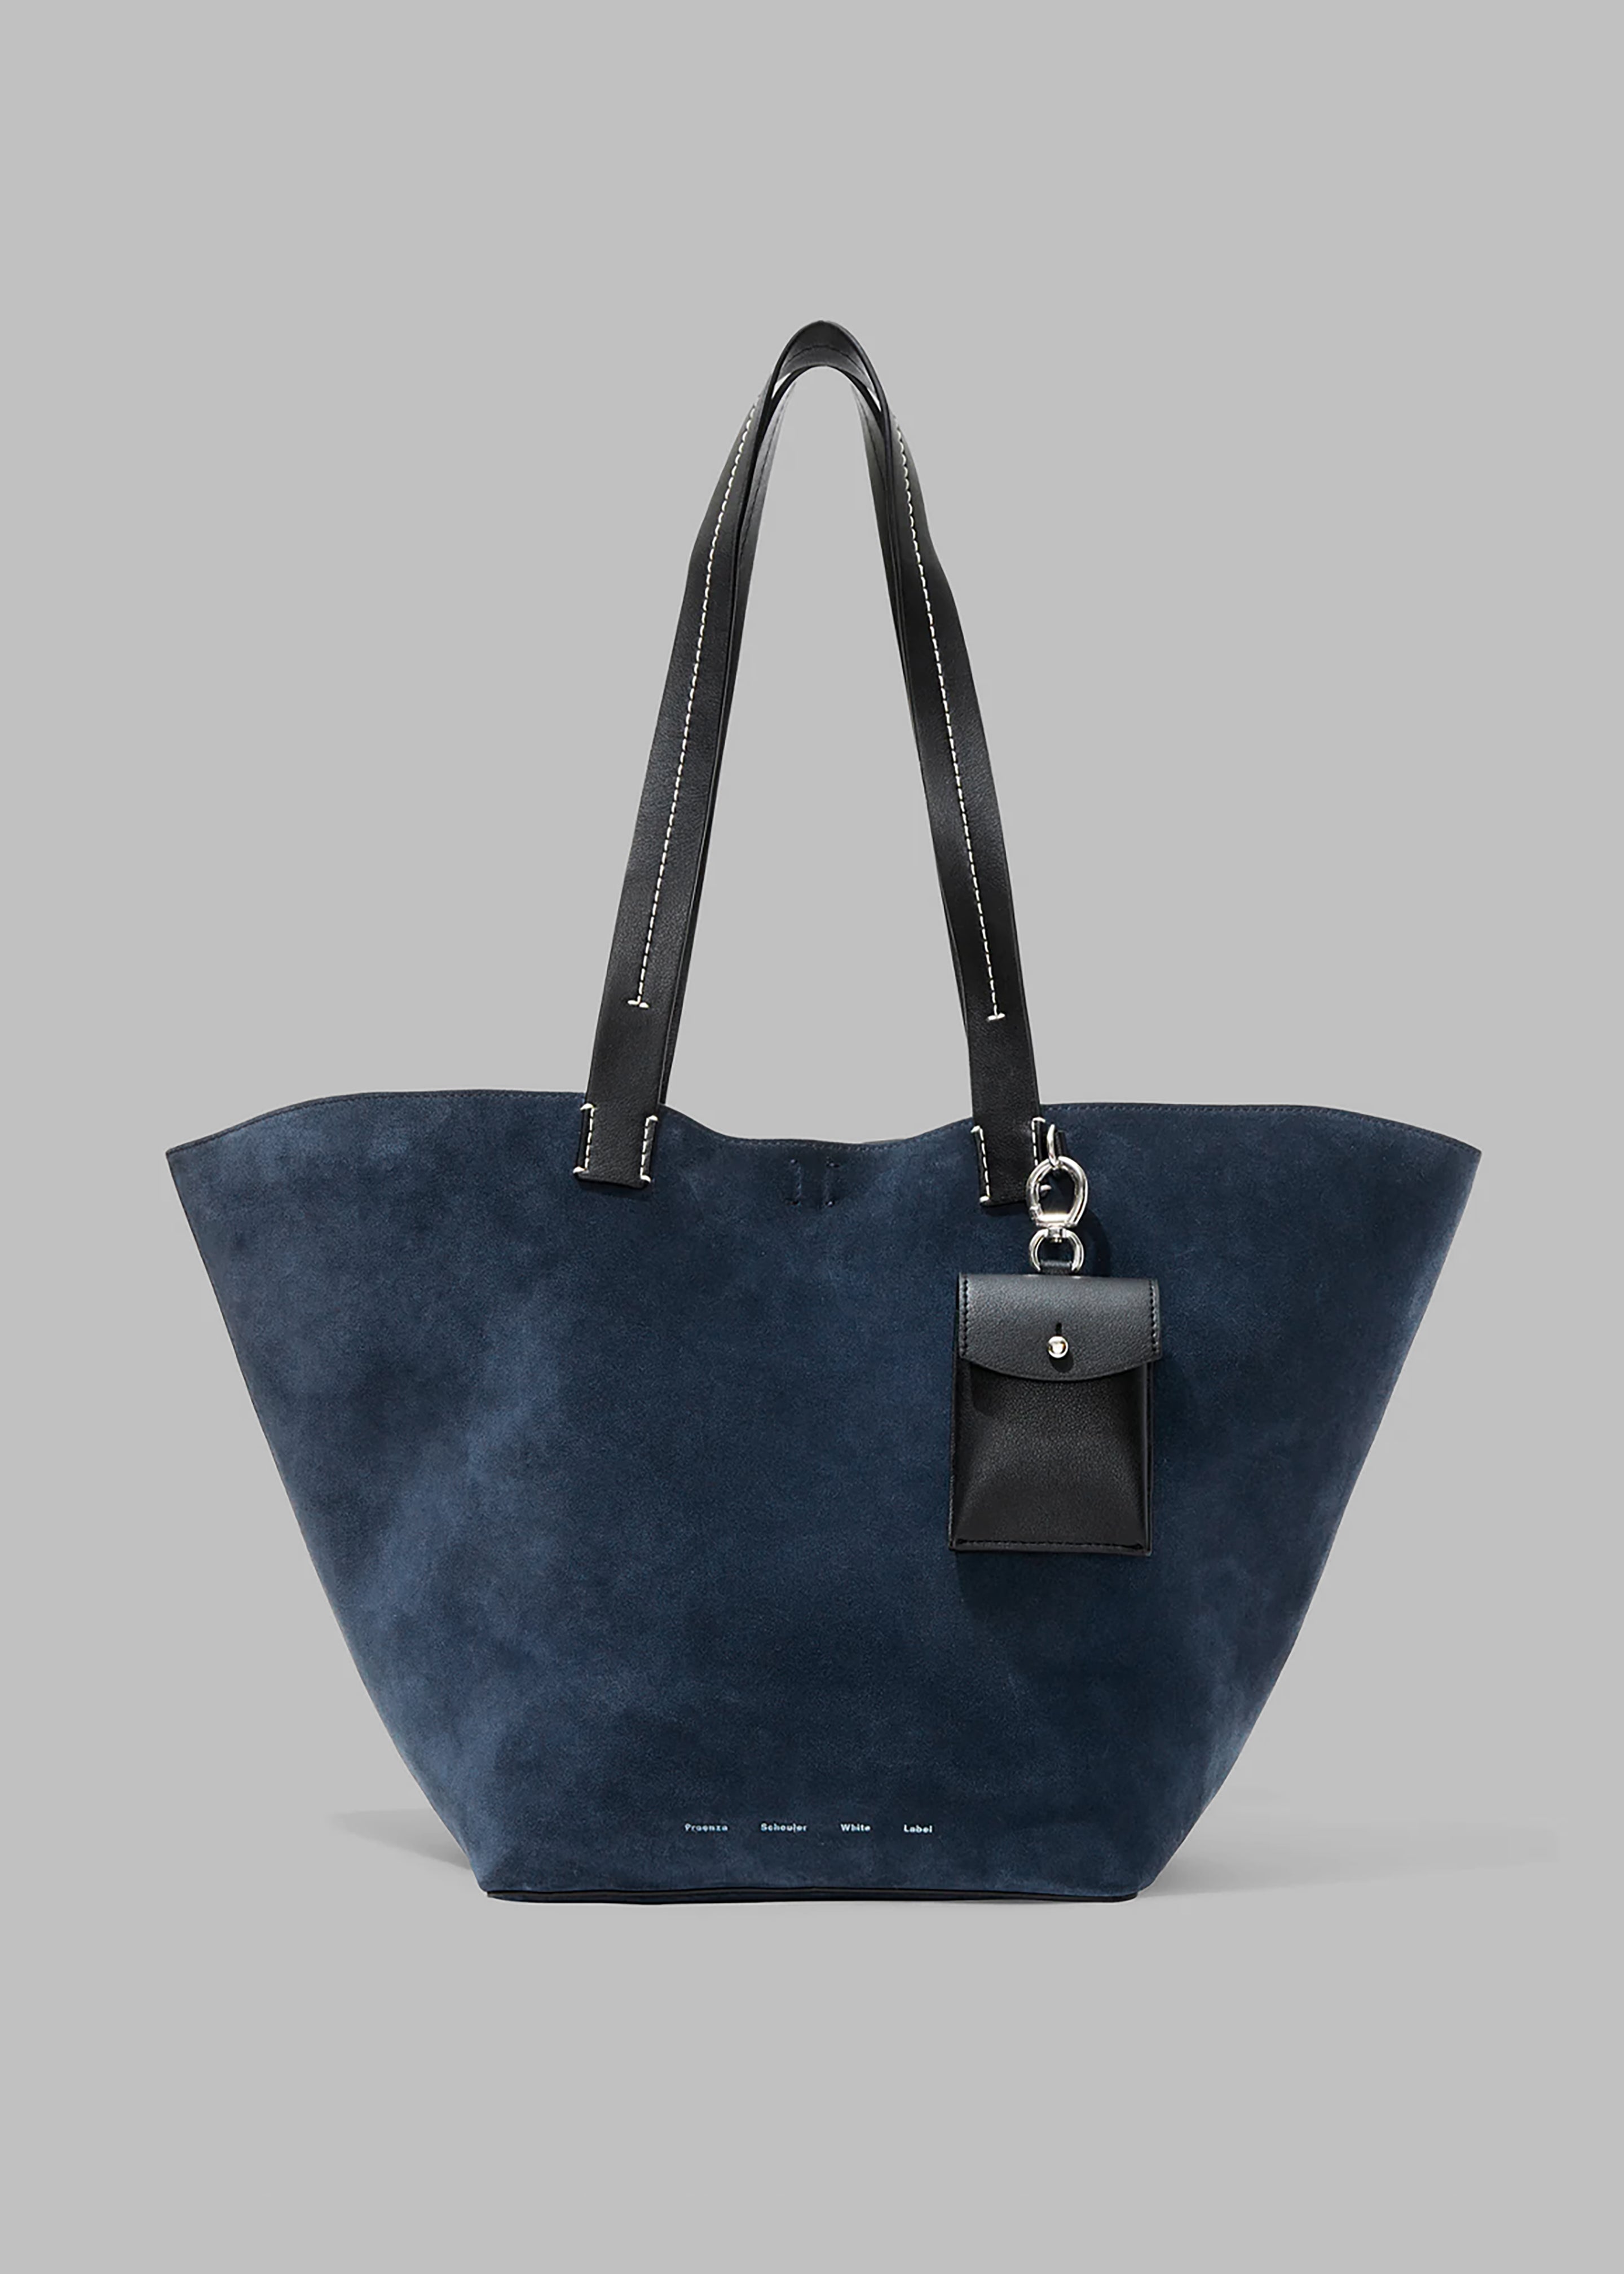 Proenza Schouler White Label Large Suede Bedford Tote - Navy/Black - 1